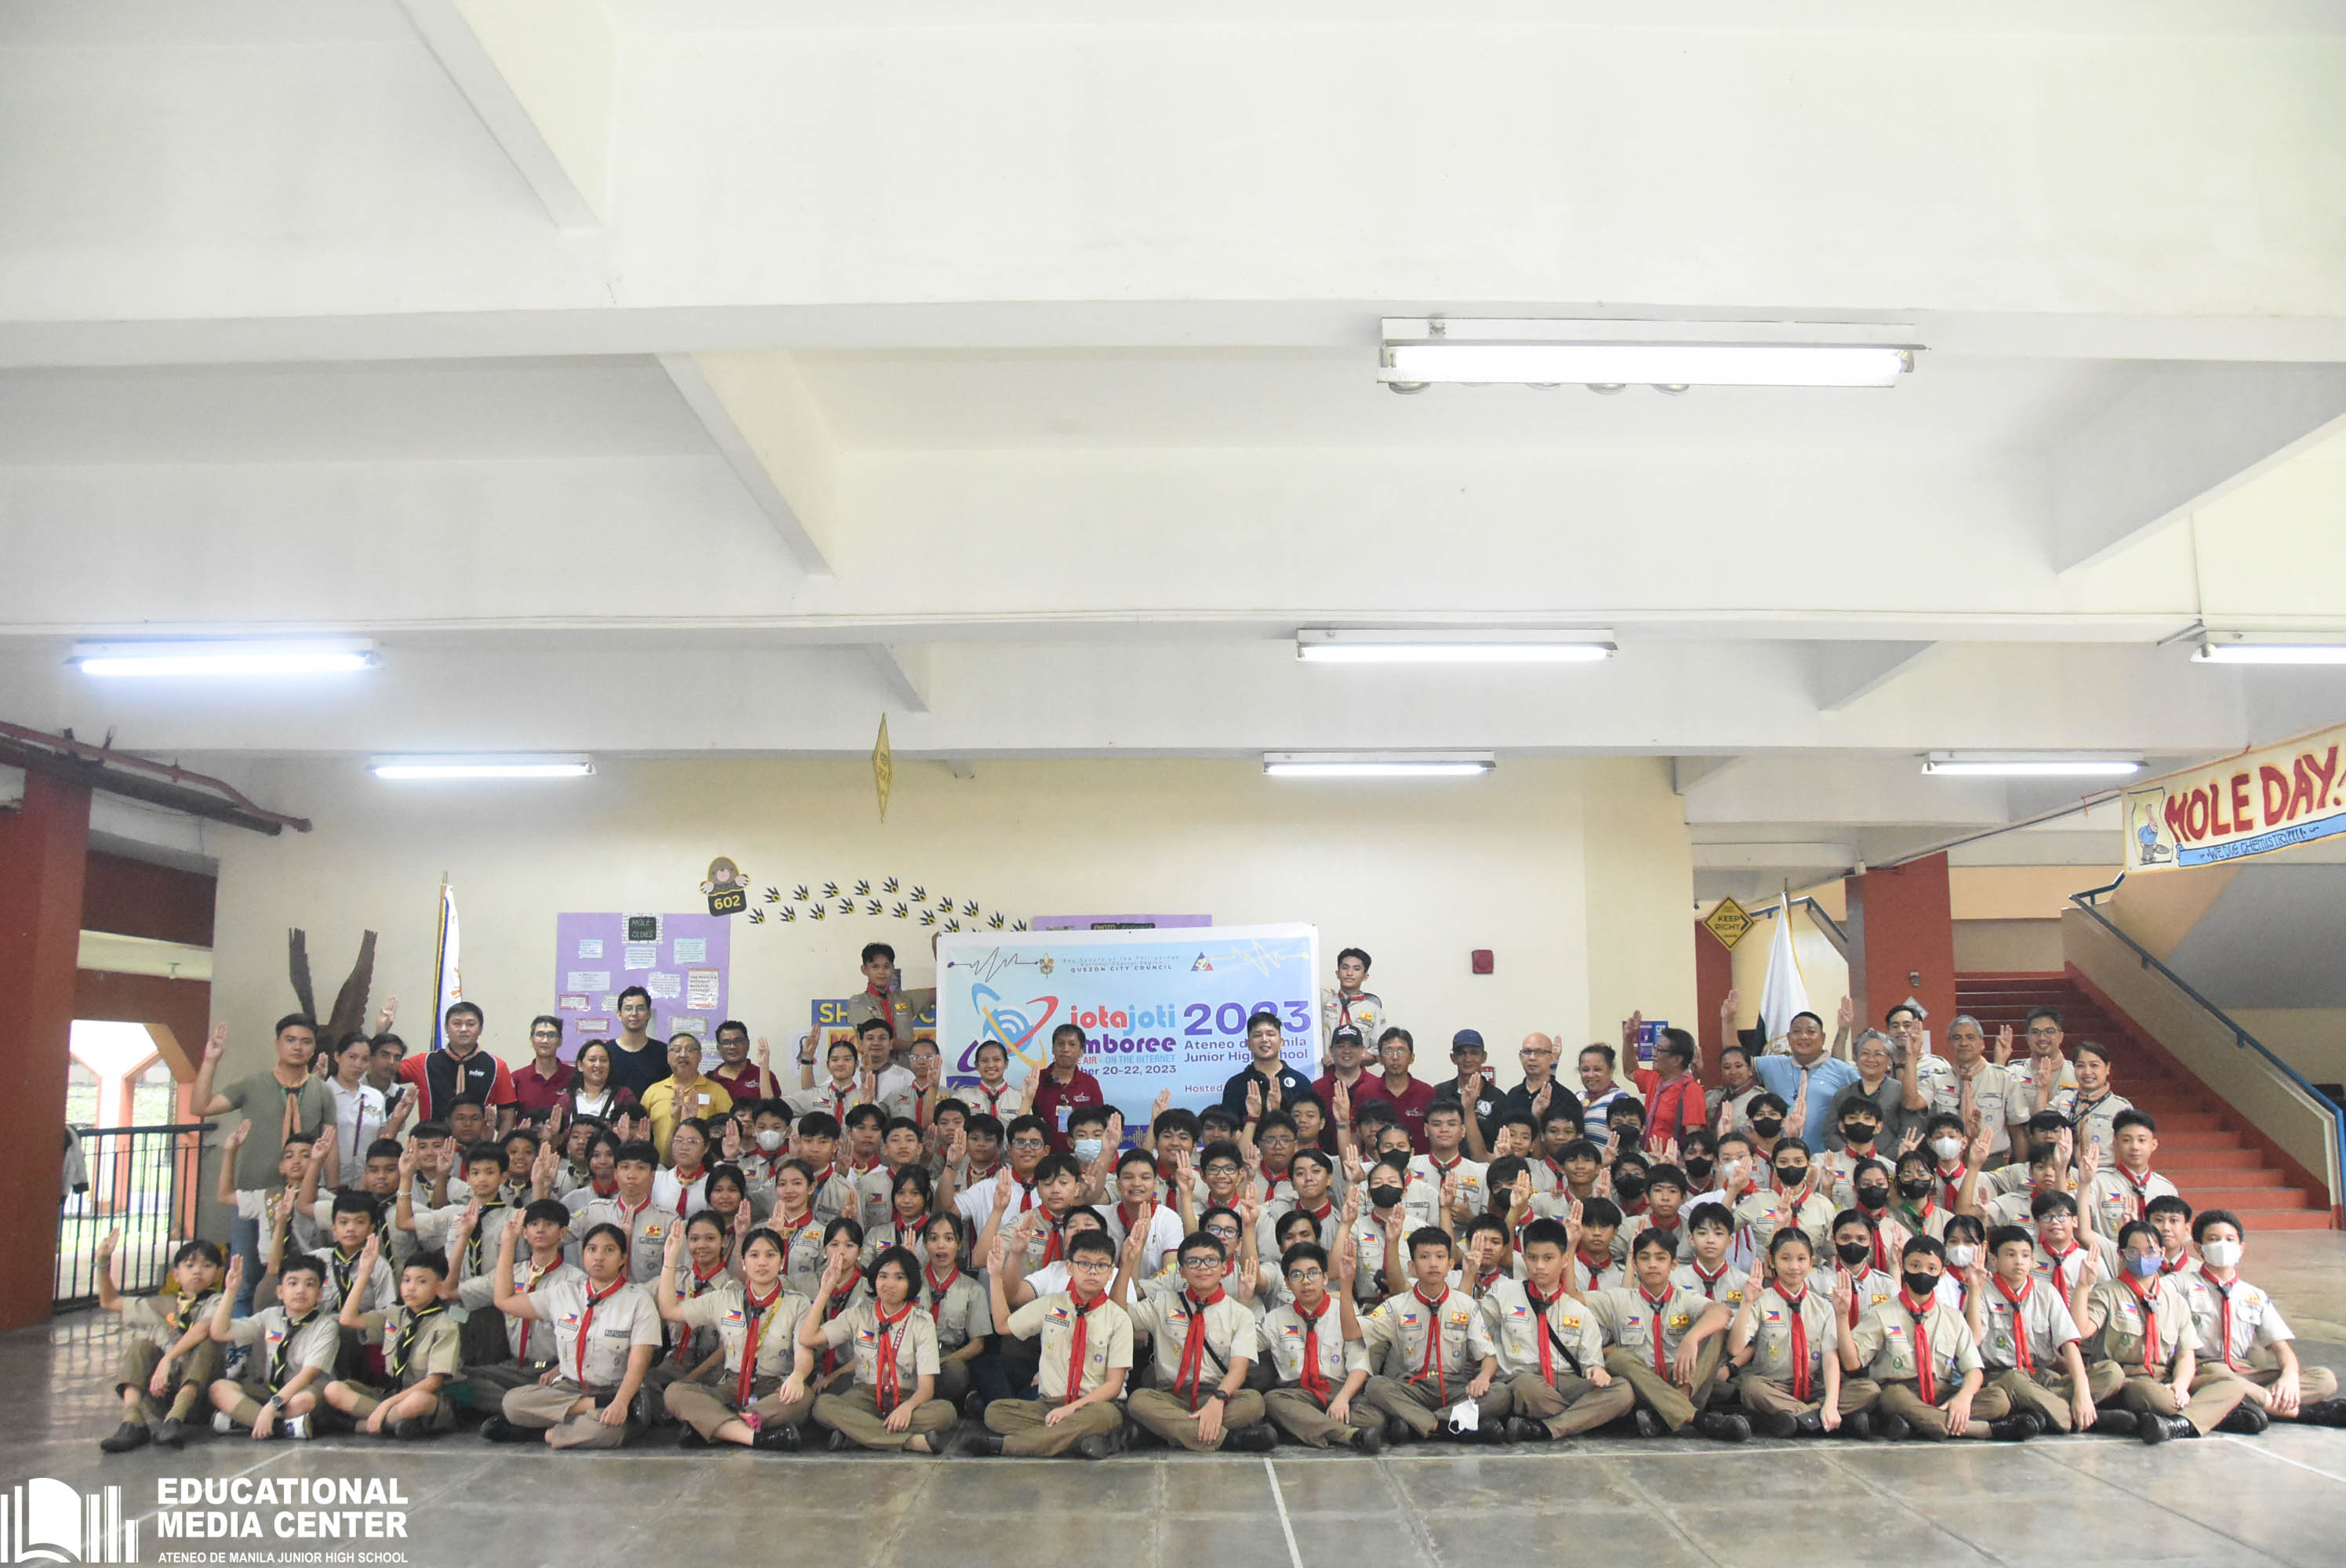 District 3's Scouts and Scouters and members of the BSP Quezon City Council pose for a group photo during the closing ceremony